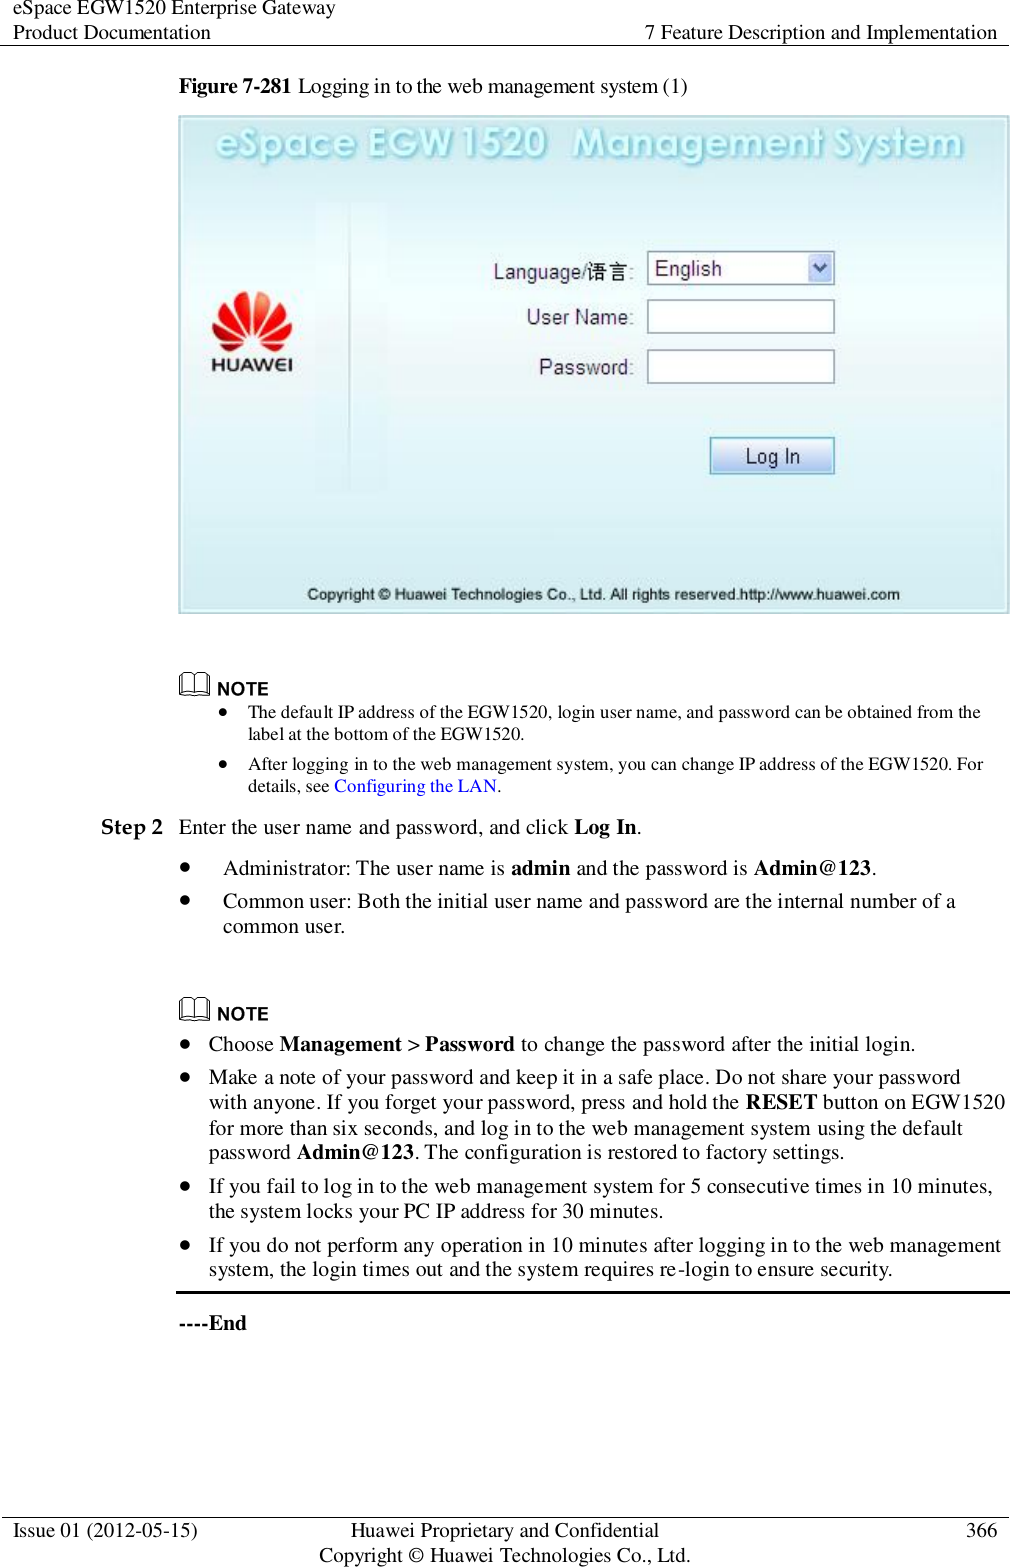 eSpace EGW1520 Enterprise Gateway Product Documentation 7 Feature Description and Implementation  Issue 01 (2012-05-15) Huawei Proprietary and Confidential                                     Copyright © Huawei Technologies Co., Ltd. 366  Figure 7-281 Logging in to the web management system (1)     The default IP address of the EGW1520, login user name, and password can be obtained from the label at the bottom of the EGW1520.  After logging in to the web management system, you can change IP address of the EGW1520. For details, see Configuring the LAN. Step 2 Enter the user name and password, and click Log In.  Administrator: The user name is admin and the password is Admin@123.  Common user: Both the initial user name and password are the internal number of a common user.    Choose Management &gt; Password to change the password after the initial login.  Make a note of your password and keep it in a safe place. Do not share your password with anyone. If you forget your password, press and hold the RESET button on EGW1520 for more than six seconds, and log in to the web management system using the default password Admin@123. The configuration is restored to factory settings.  If you fail to log in to the web management system for 5 consecutive times in 10 minutes, the system locks your PC IP address for 30 minutes.  If you do not perform any operation in 10 minutes after logging in to the web management system, the login times out and the system requires re-login to ensure security. ----End 